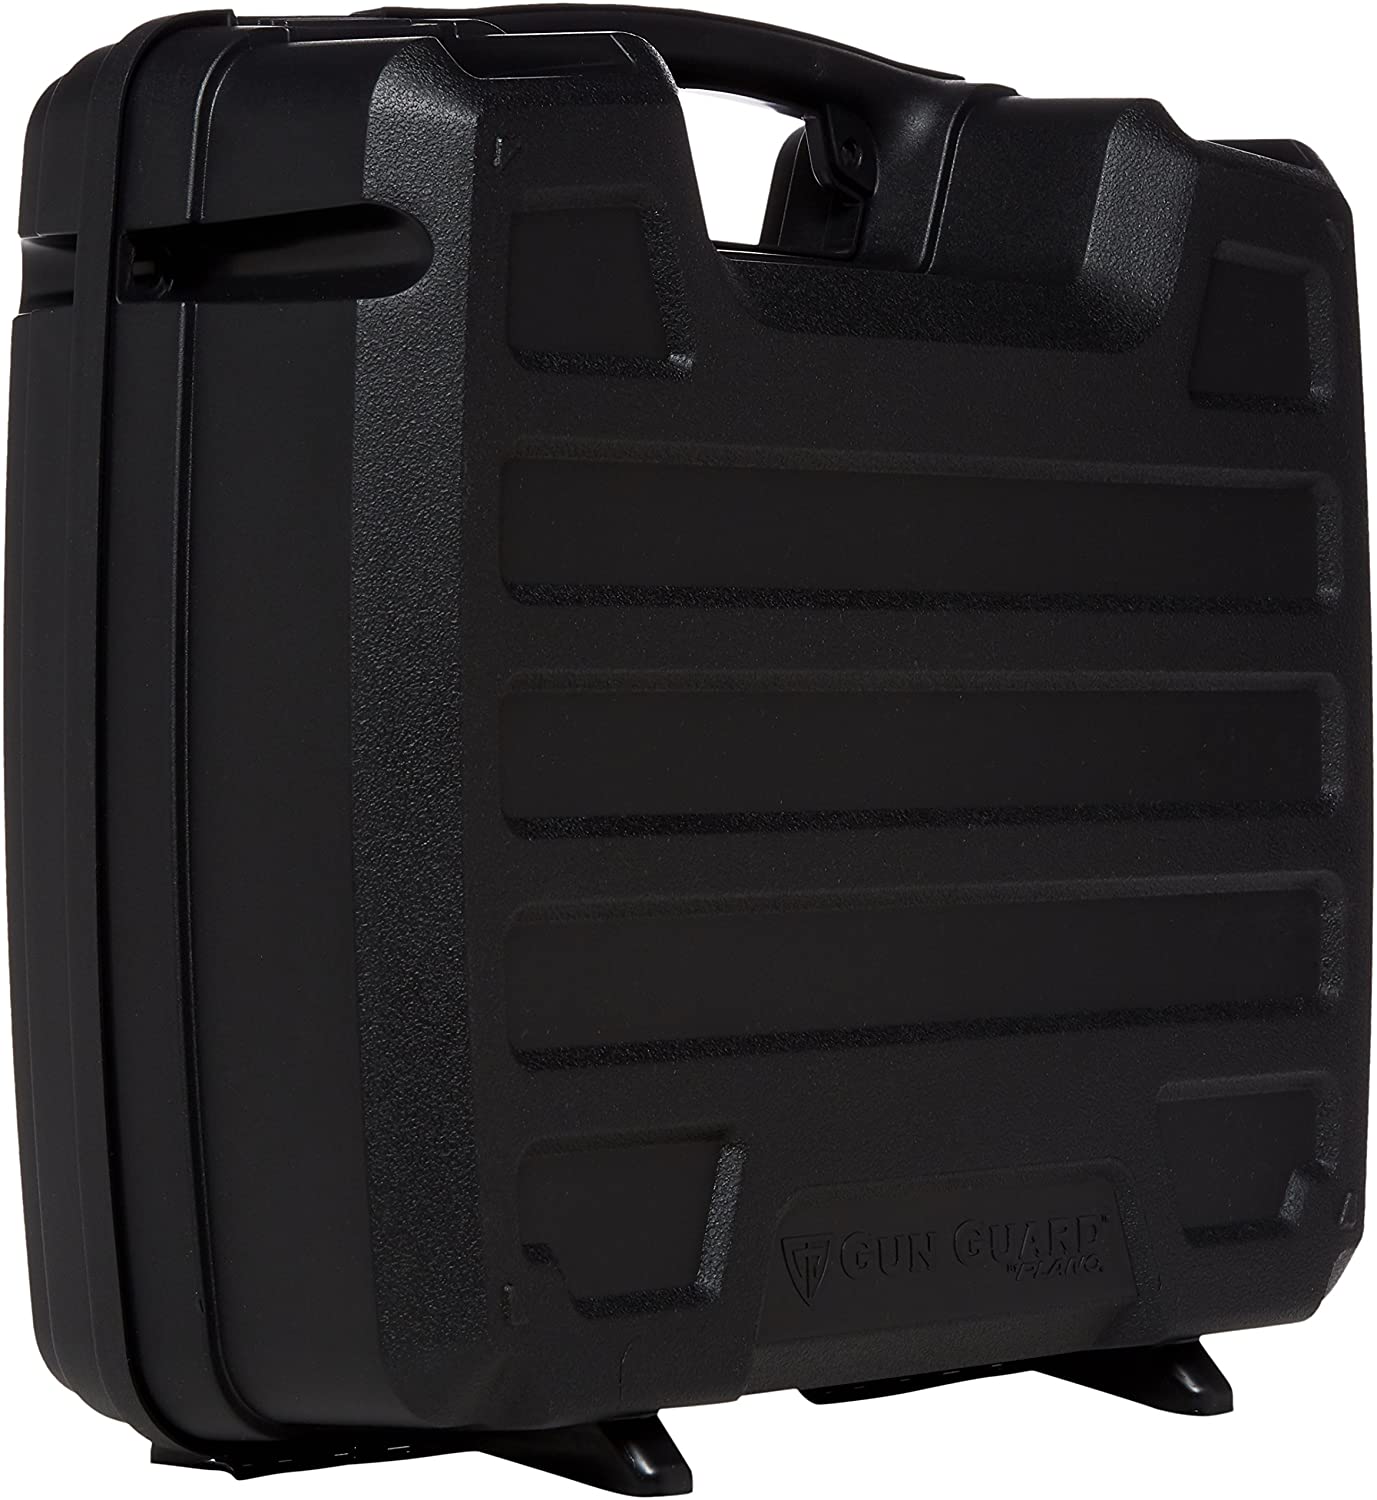 Plano Protective Case,4 in,Recessed,Black  1010164 - image 5 of 6